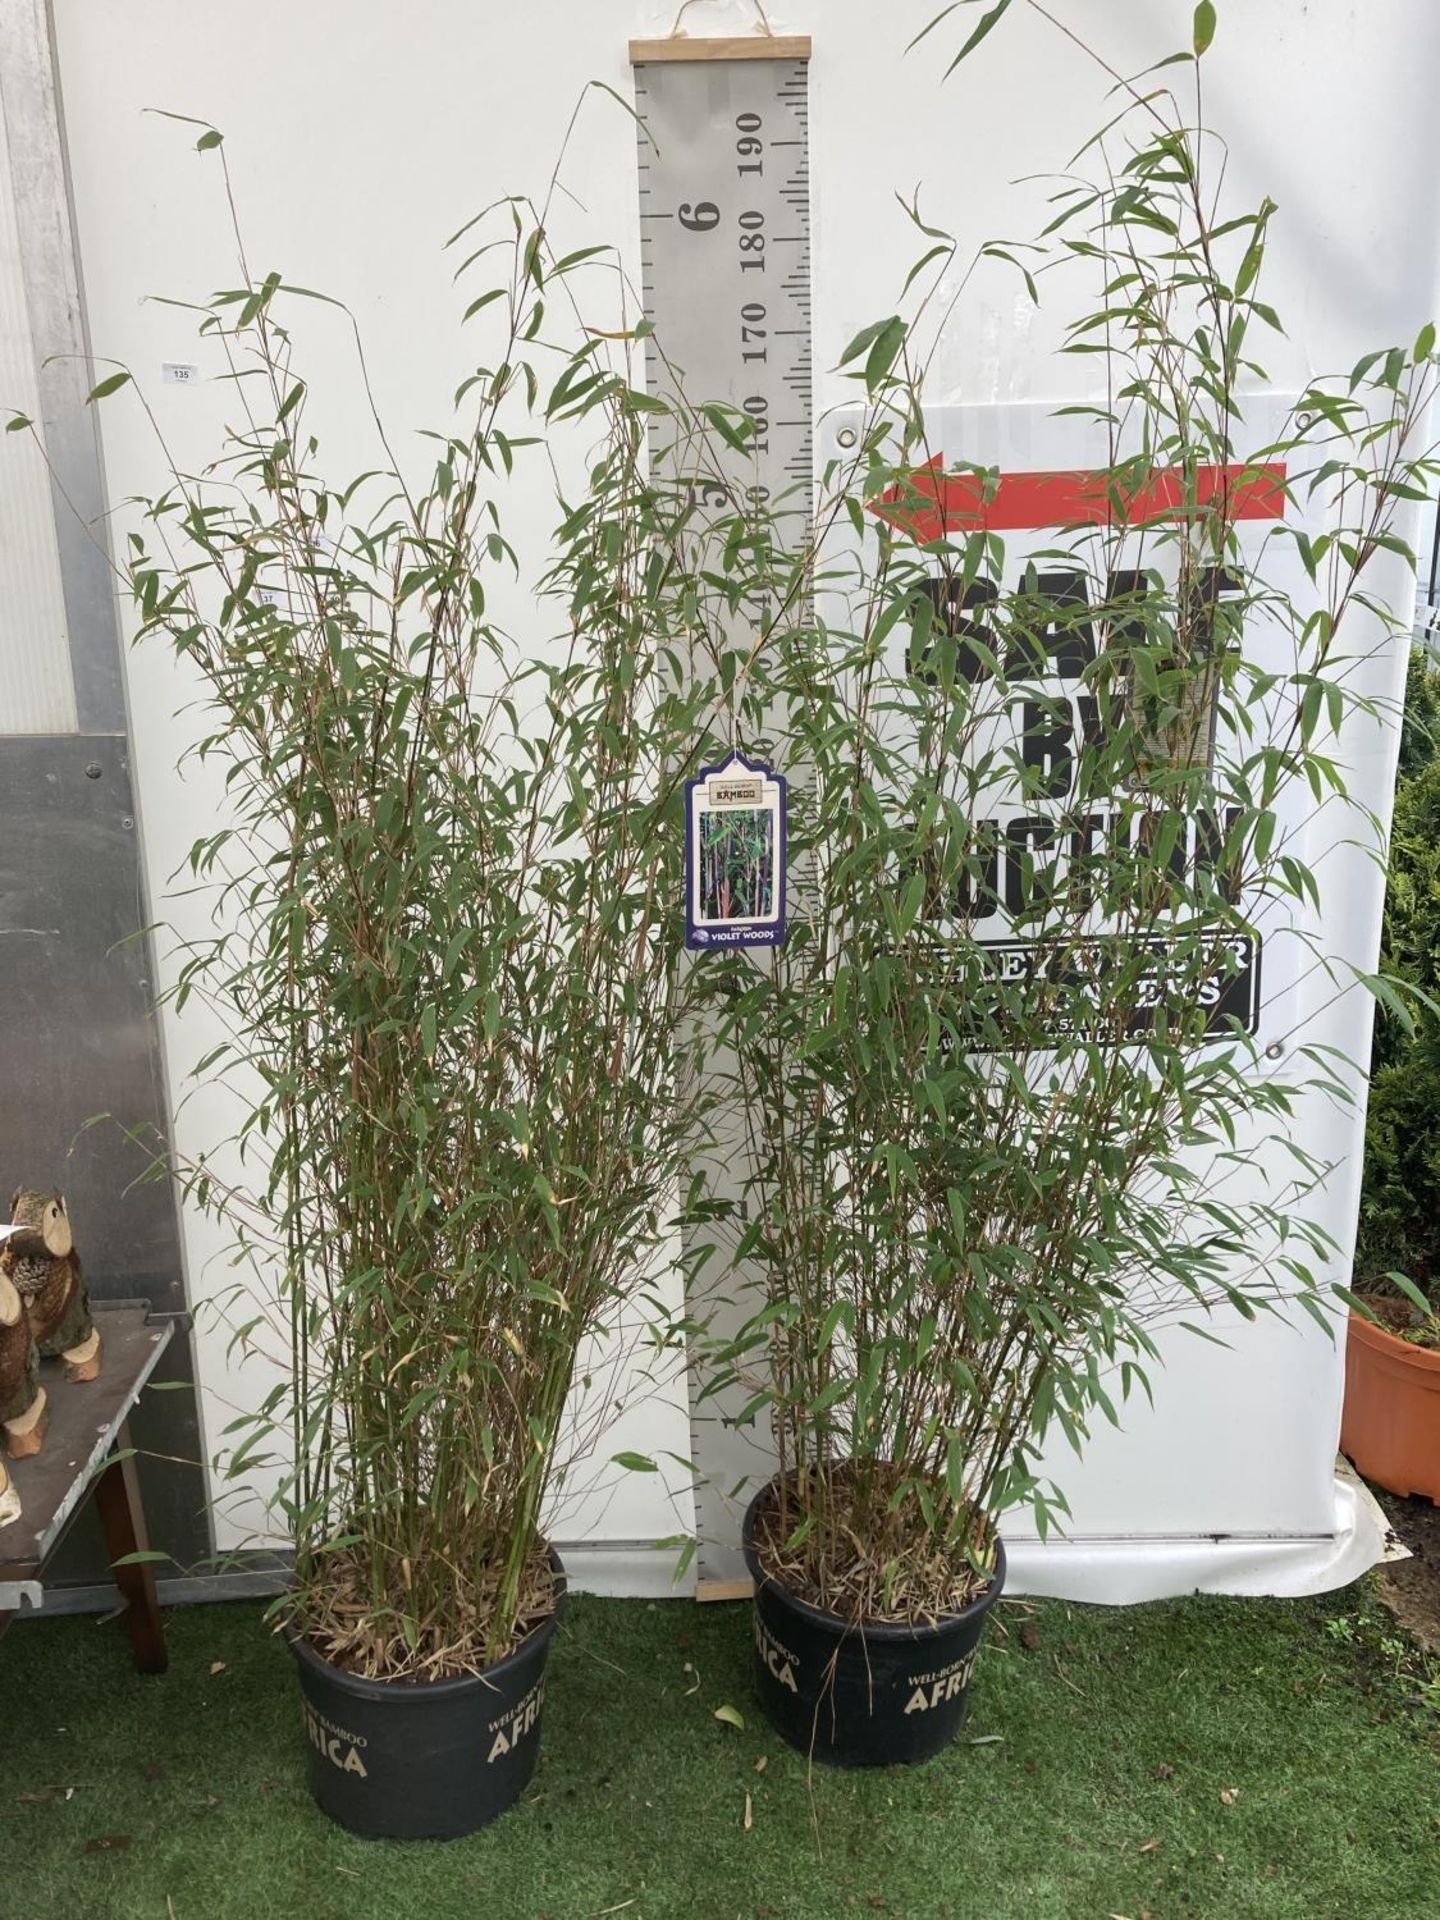 TWO LARGE BAMBOO FARGESIA 'VIOLET WOODS' APPROX 180CM IN HEIGHT IN 10 LTR POTS PLUS VAT TO BE SOLD